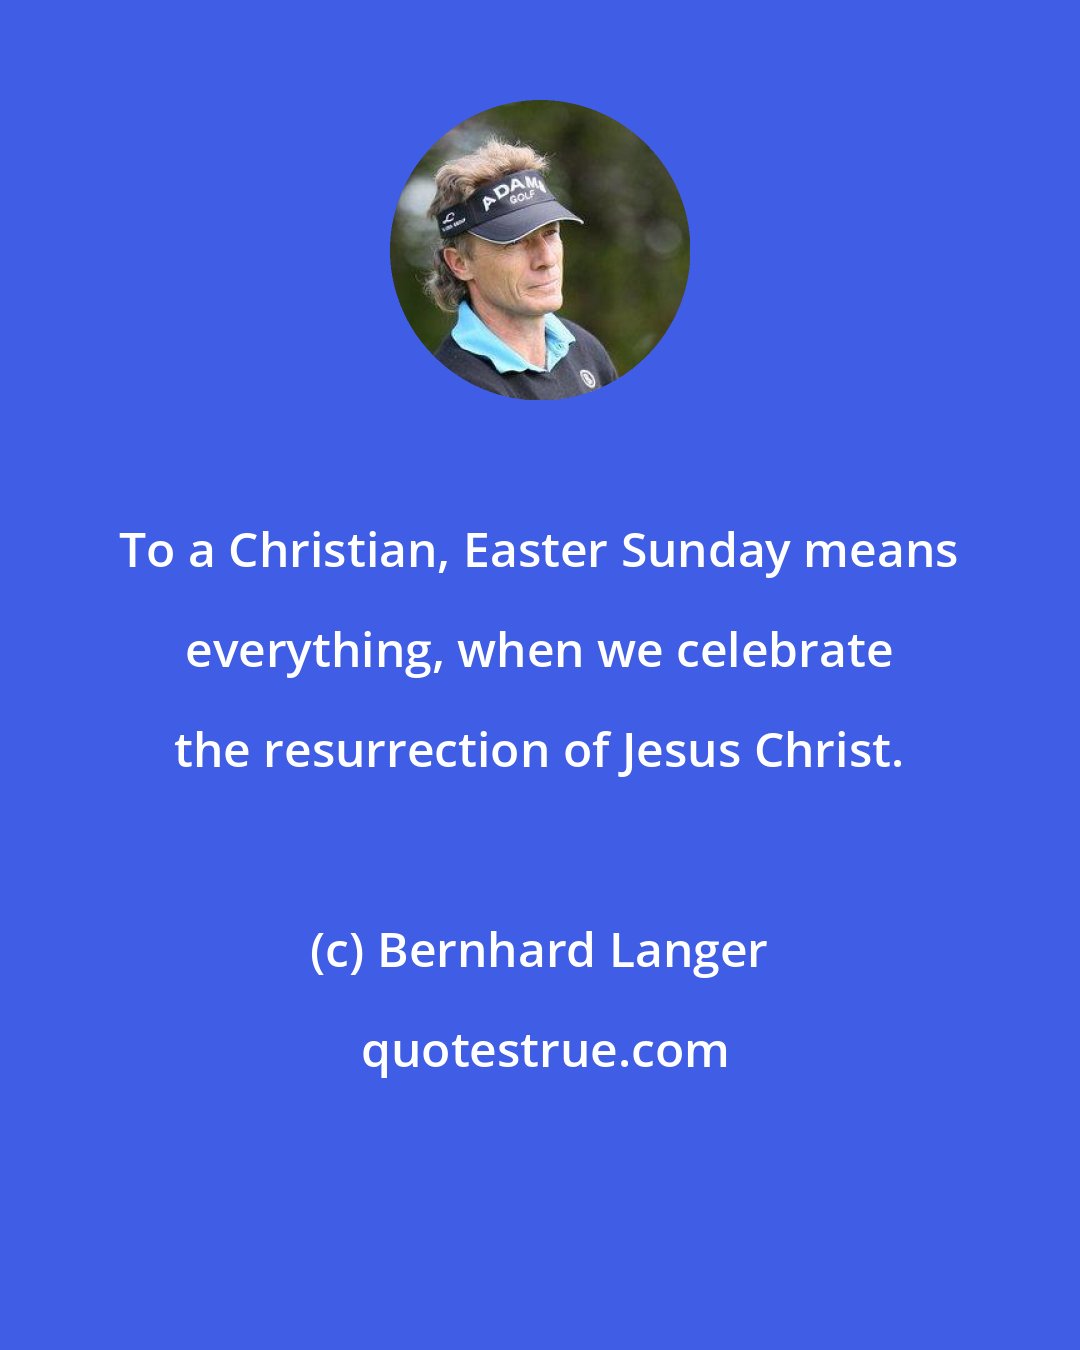 Bernhard Langer: To a Christian, Easter Sunday means everything, when we celebrate the resurrection of Jesus Christ.